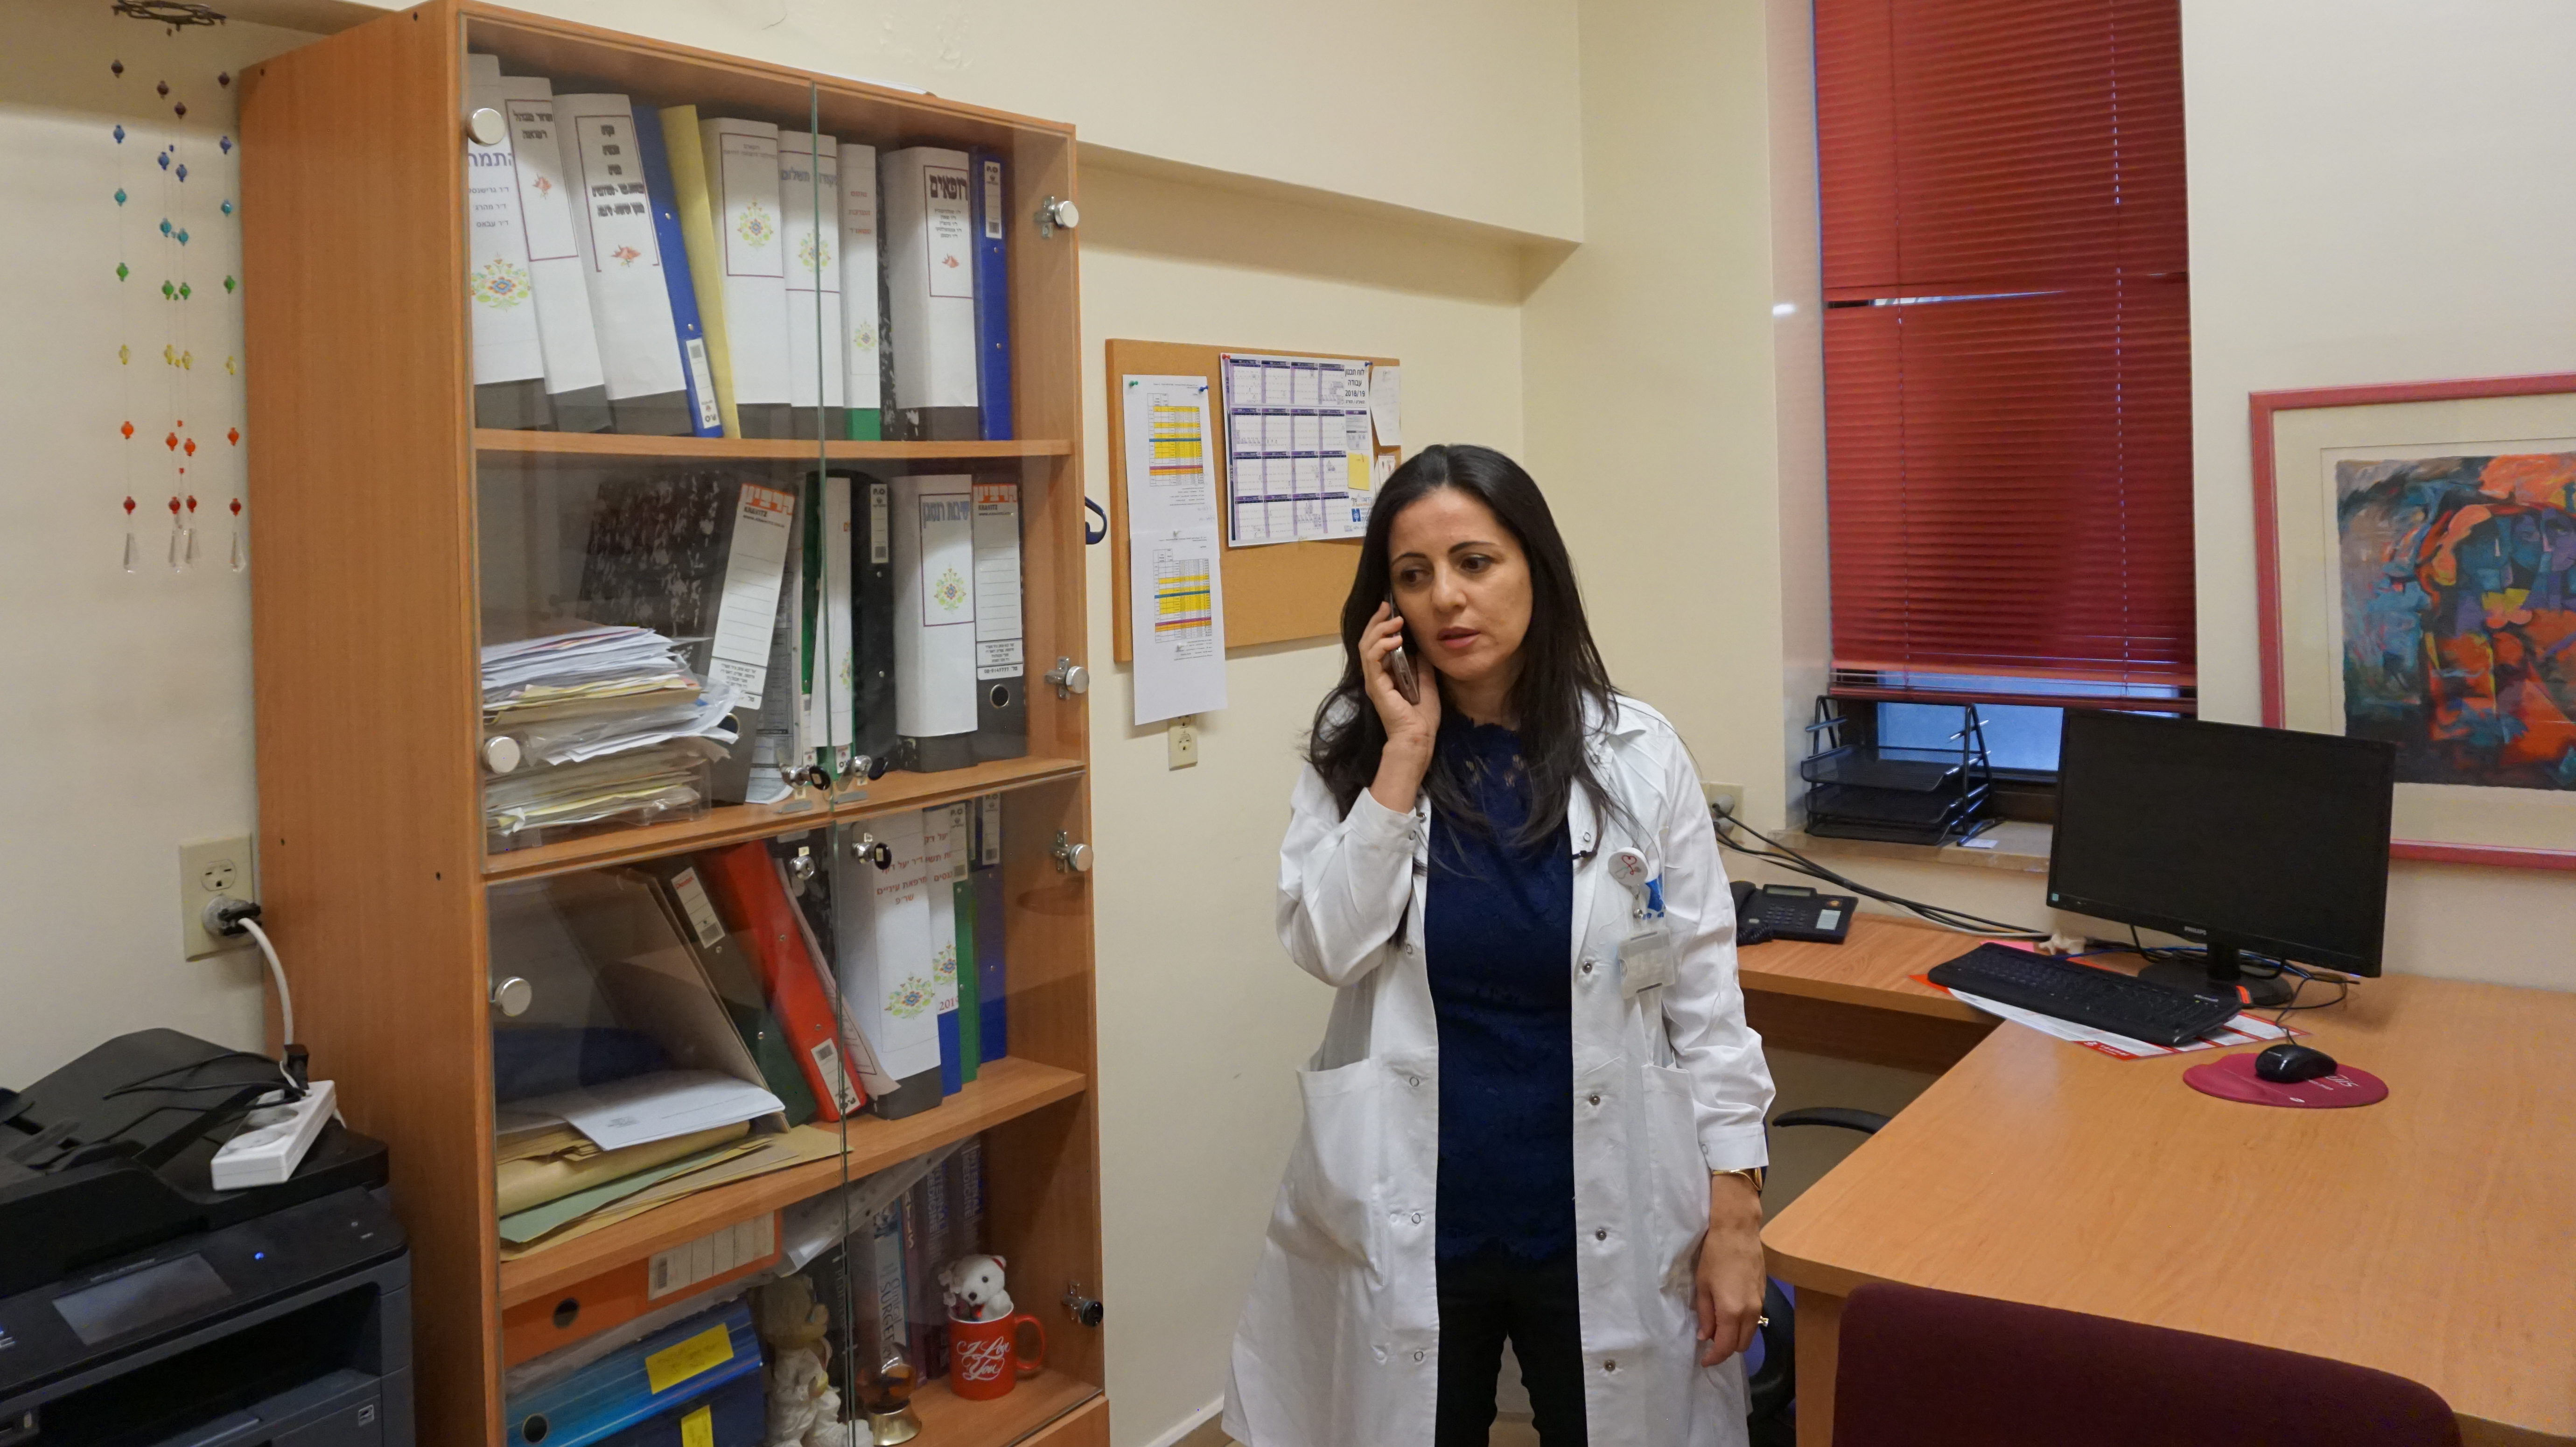 Woman Arab Doctor Defies Odds Running an Emergency Room (WITH VIDEO)